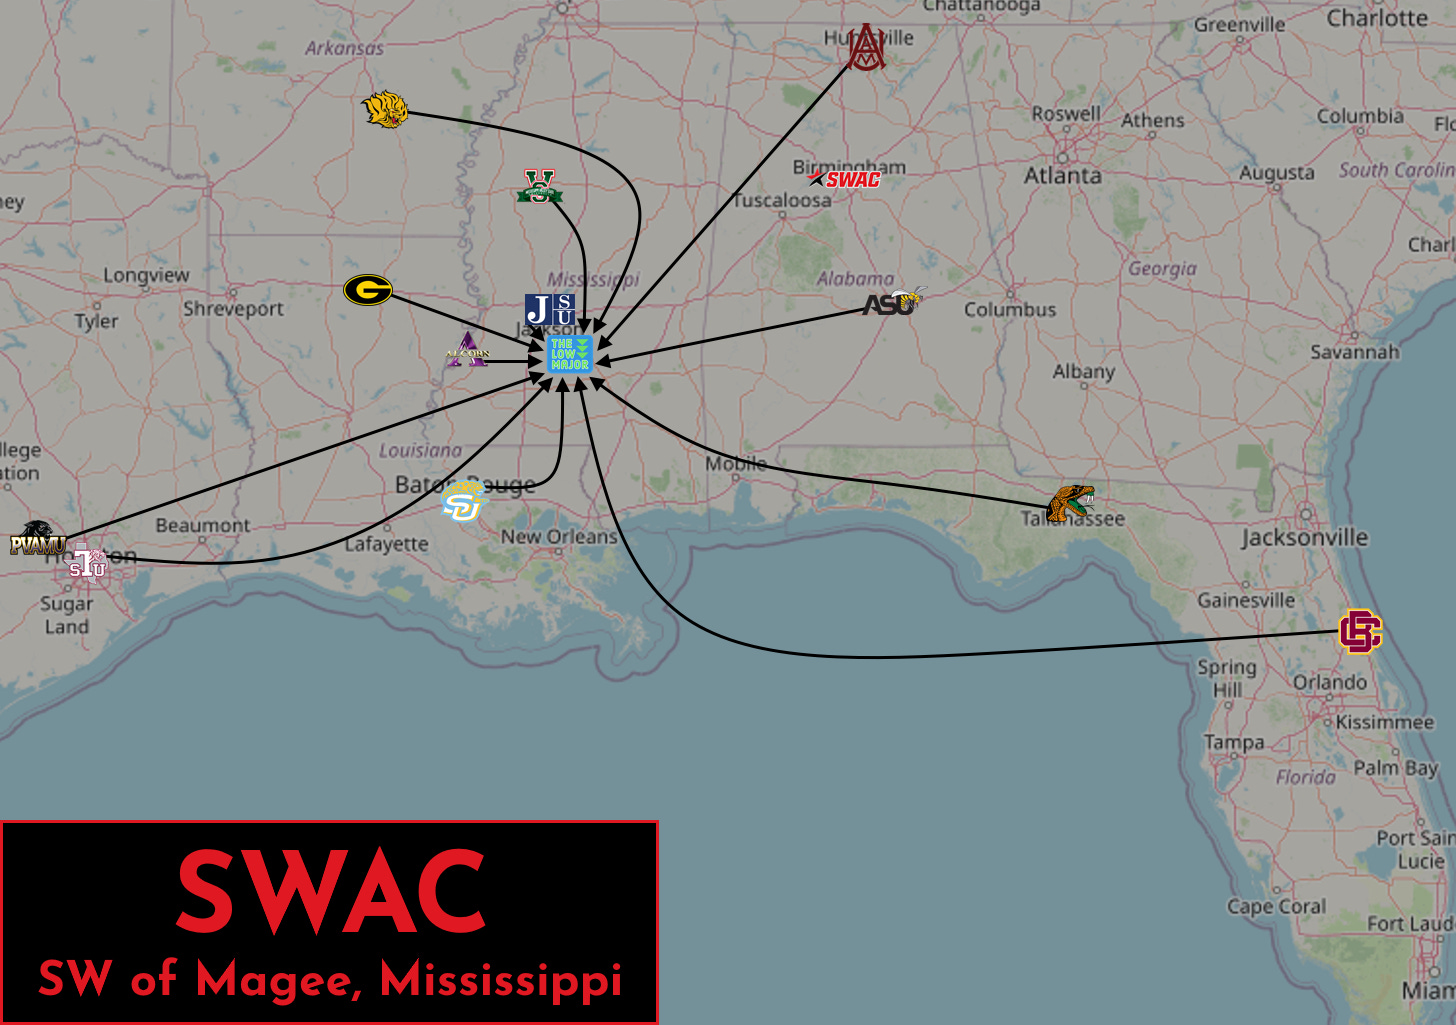 SWAC midpoint map